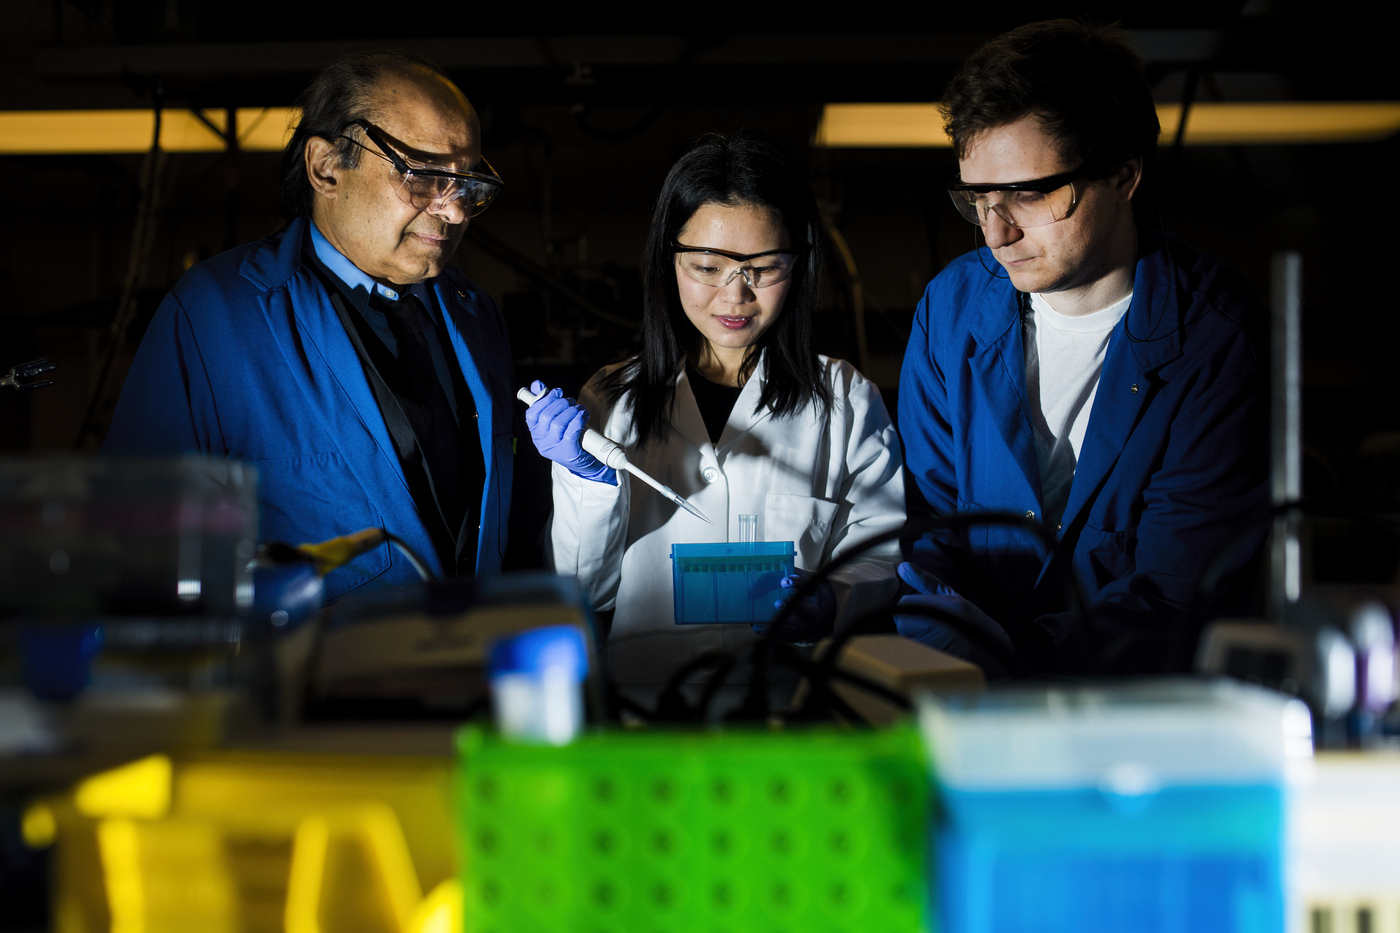 Ju Qiao is holding a pipette while flanked by Sri Sridhar and Liam Timms in a darkened lab.